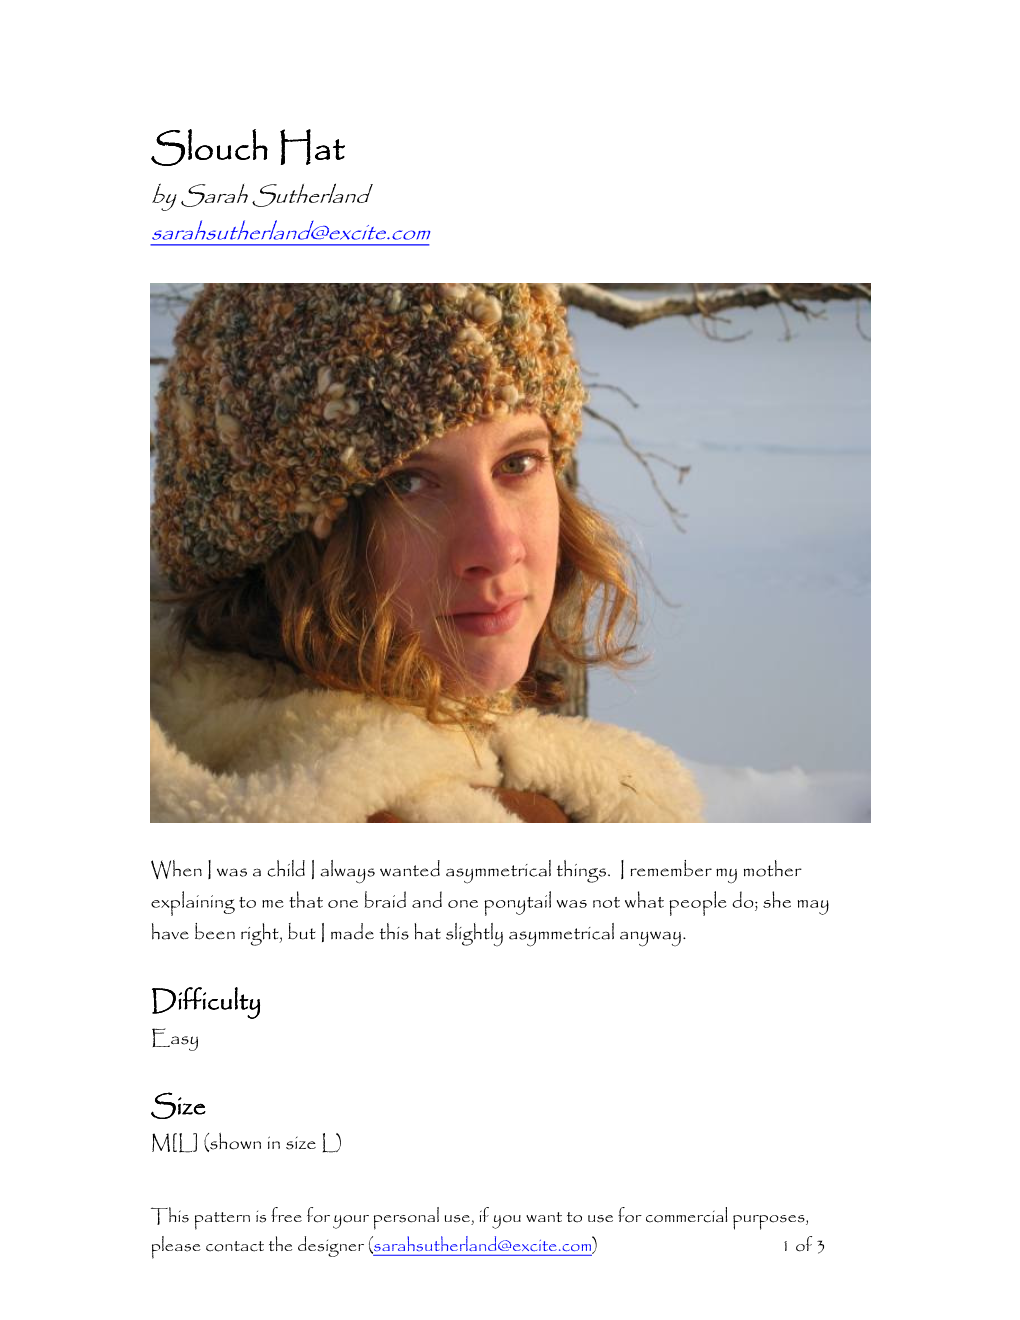 Slouch Hat by Sarah Sutherland Sarahsutherland@Excite.Com